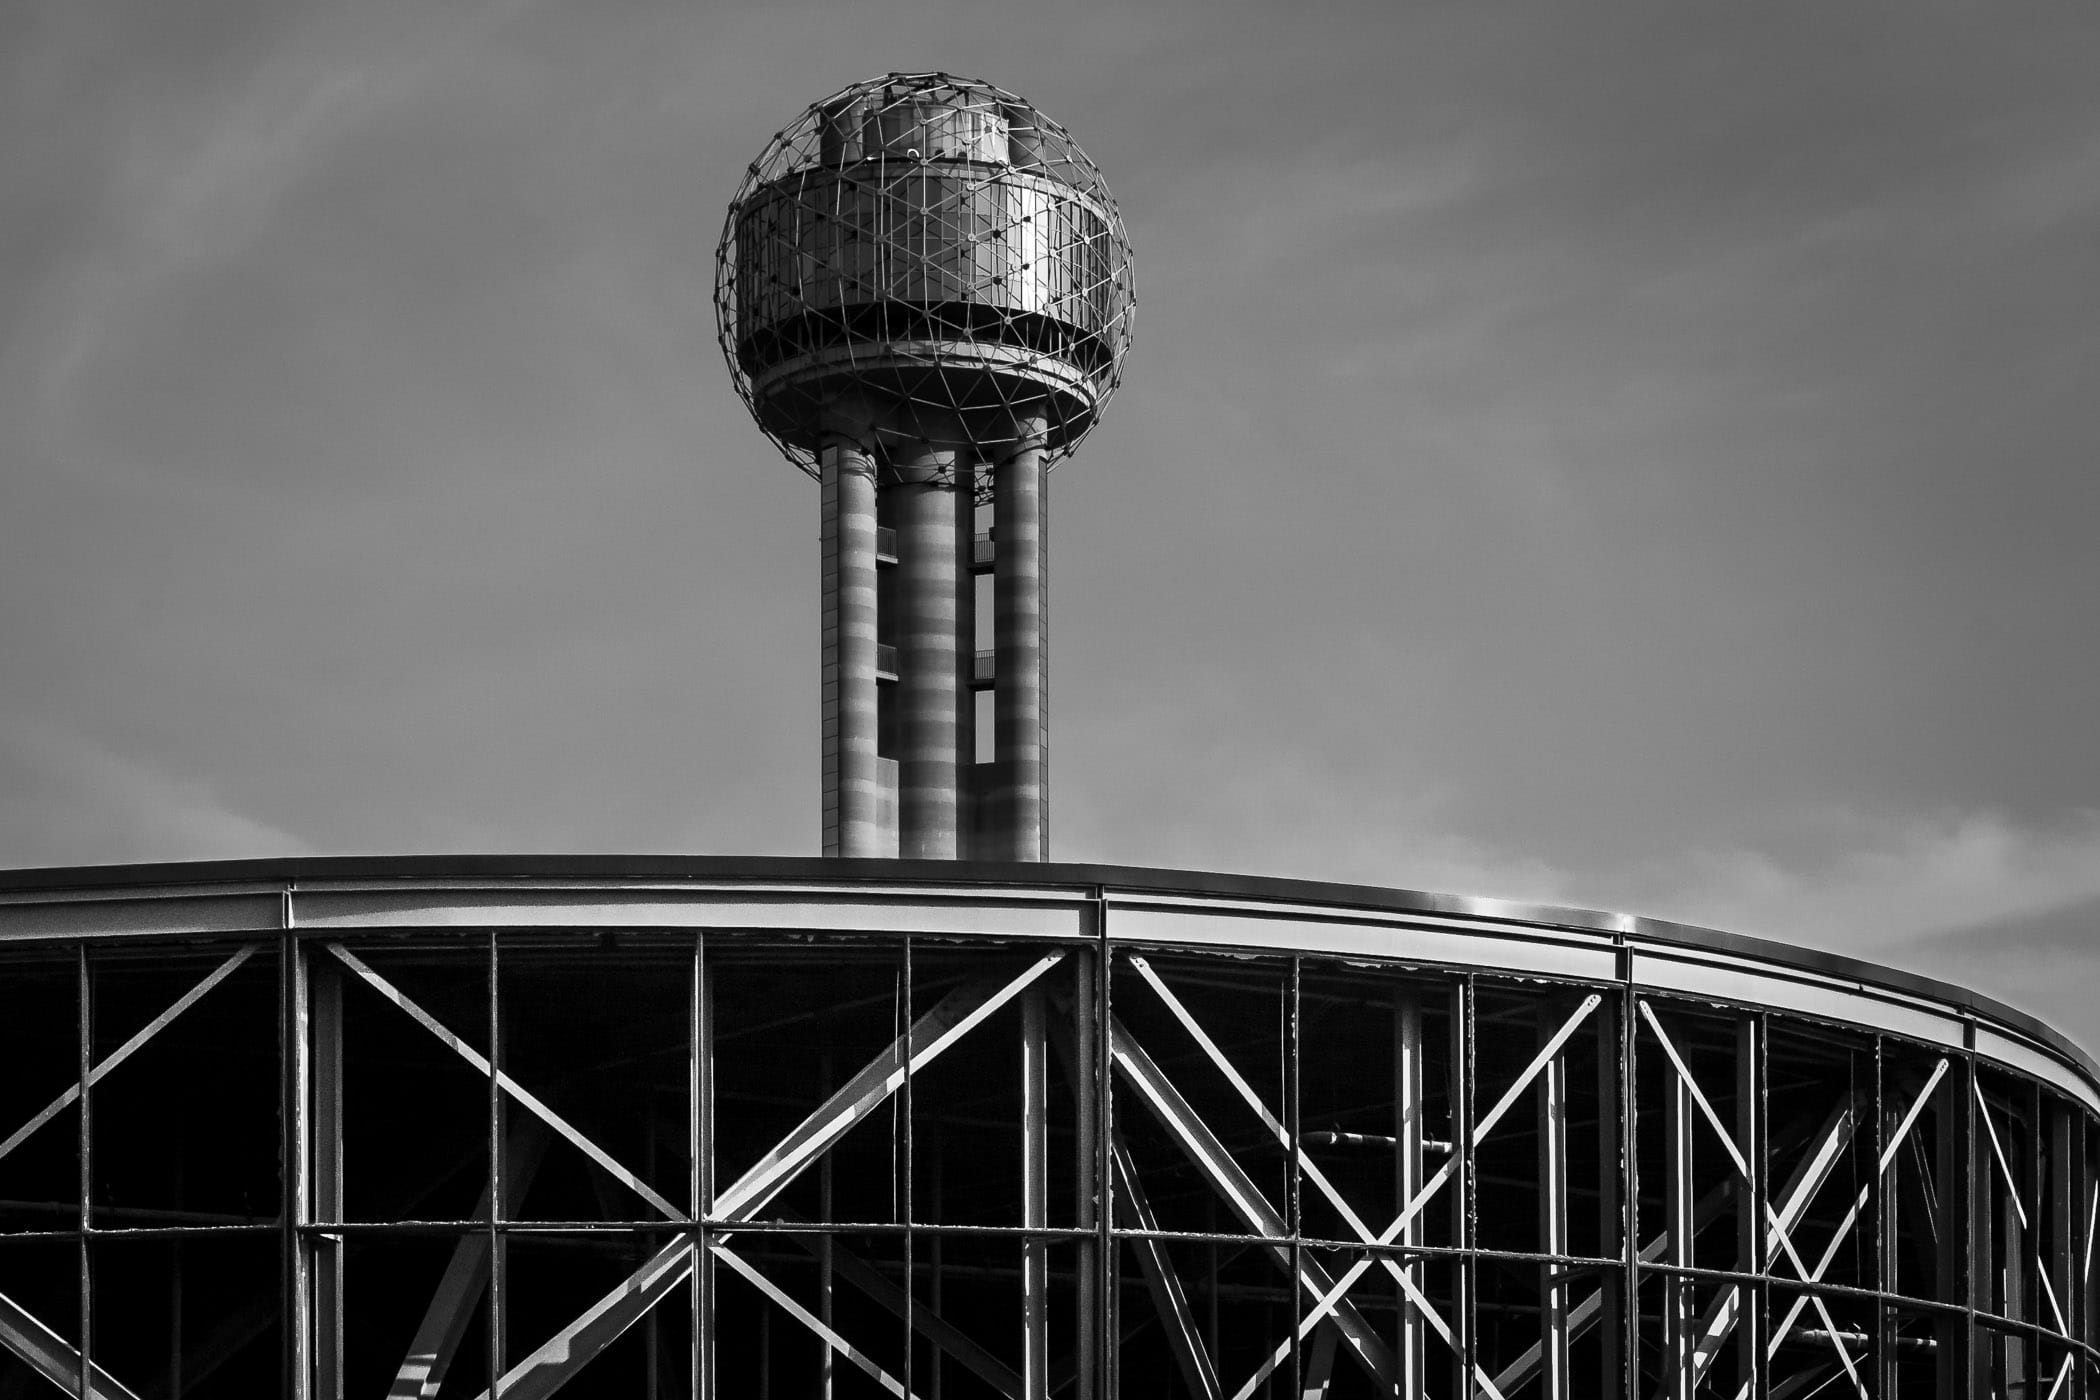 Dallas' Reunion Tower rises over the partially-demolished remains of nearby Reunion Arena.